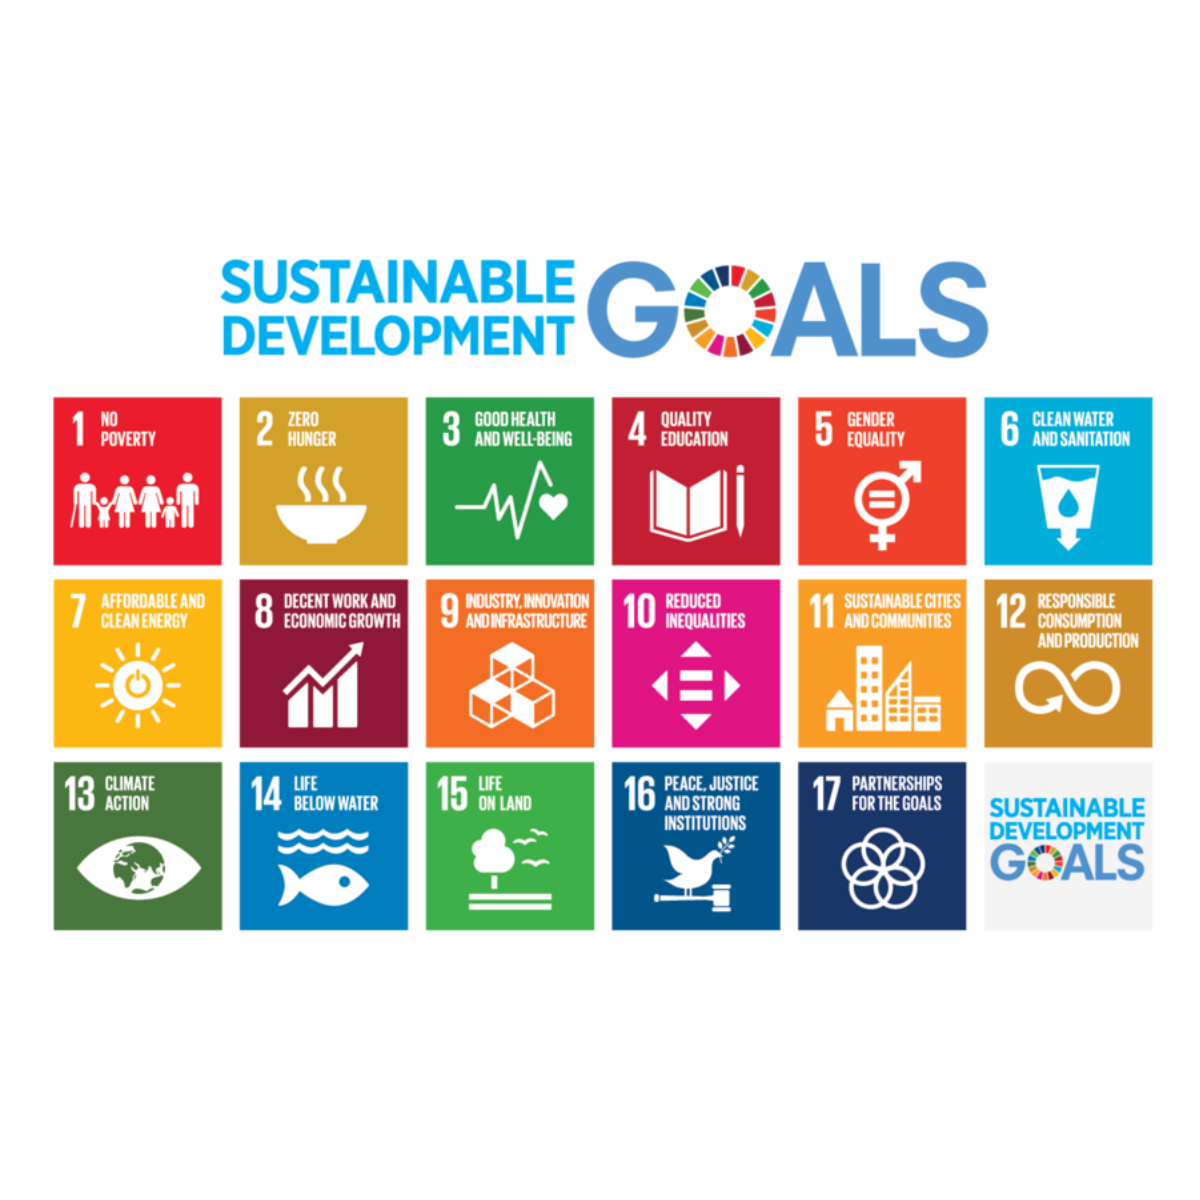 How Submit.com Supports SDGs